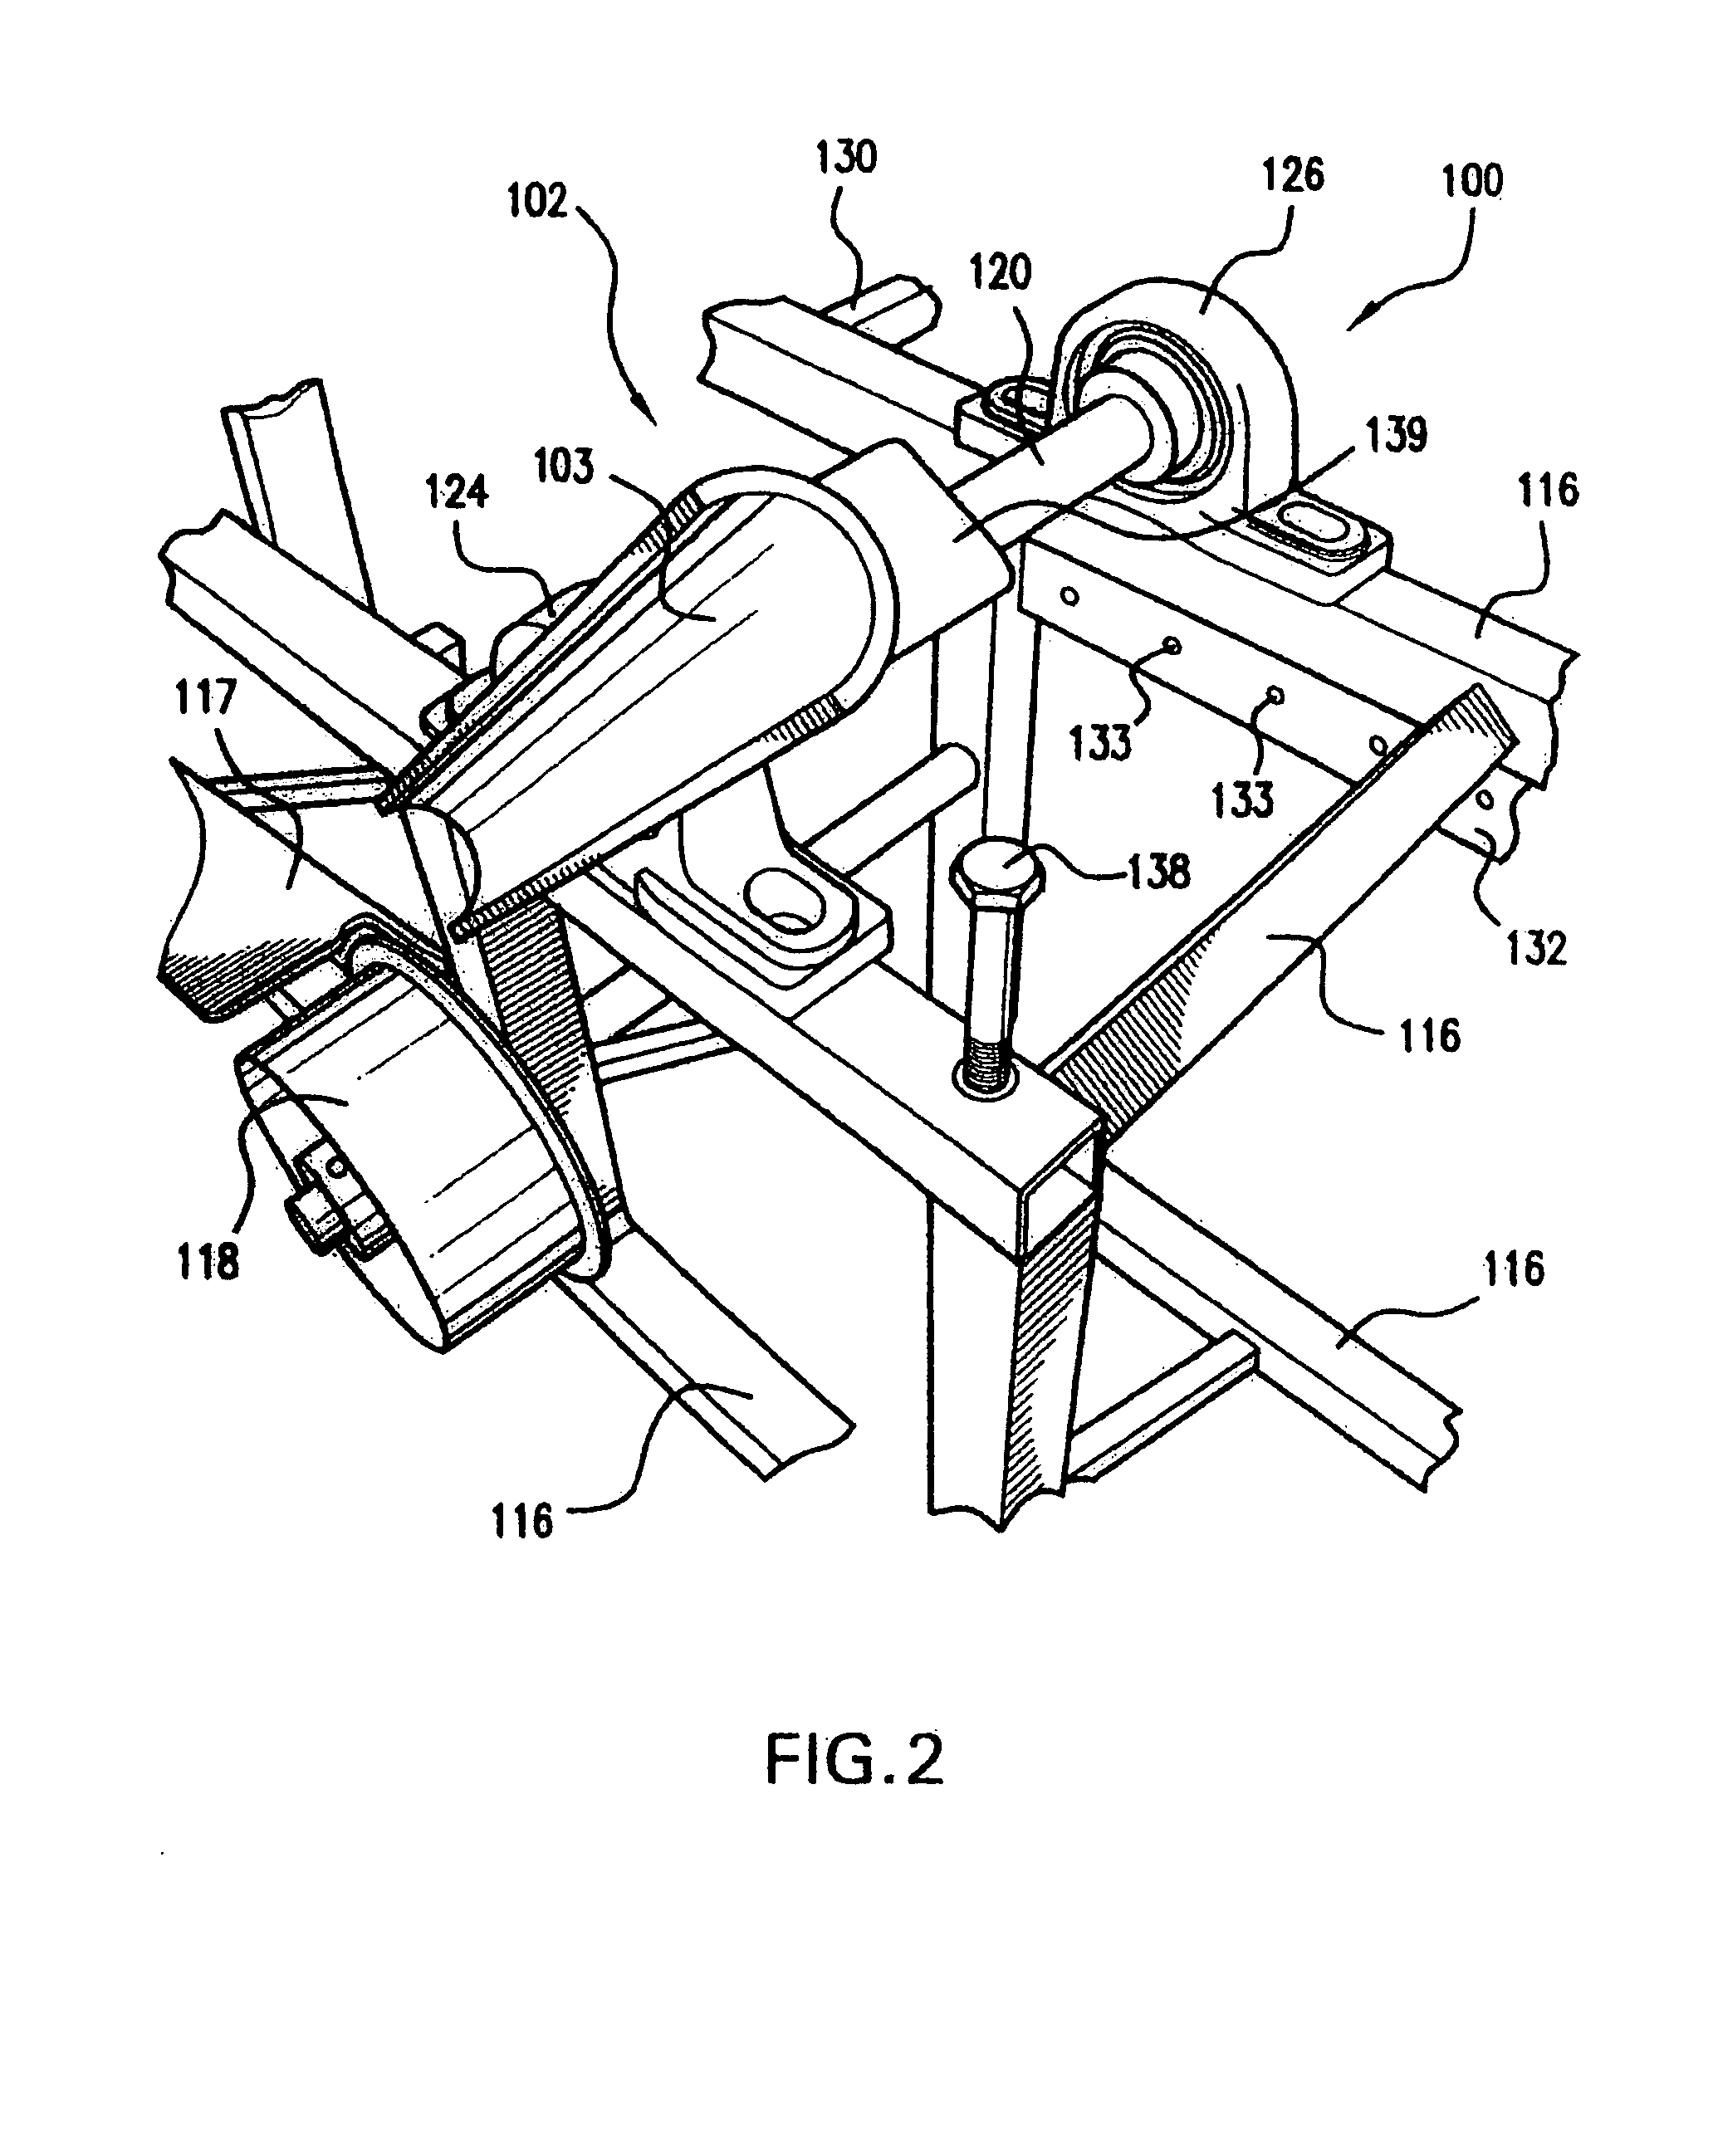 Apparatus and method for bending tubing